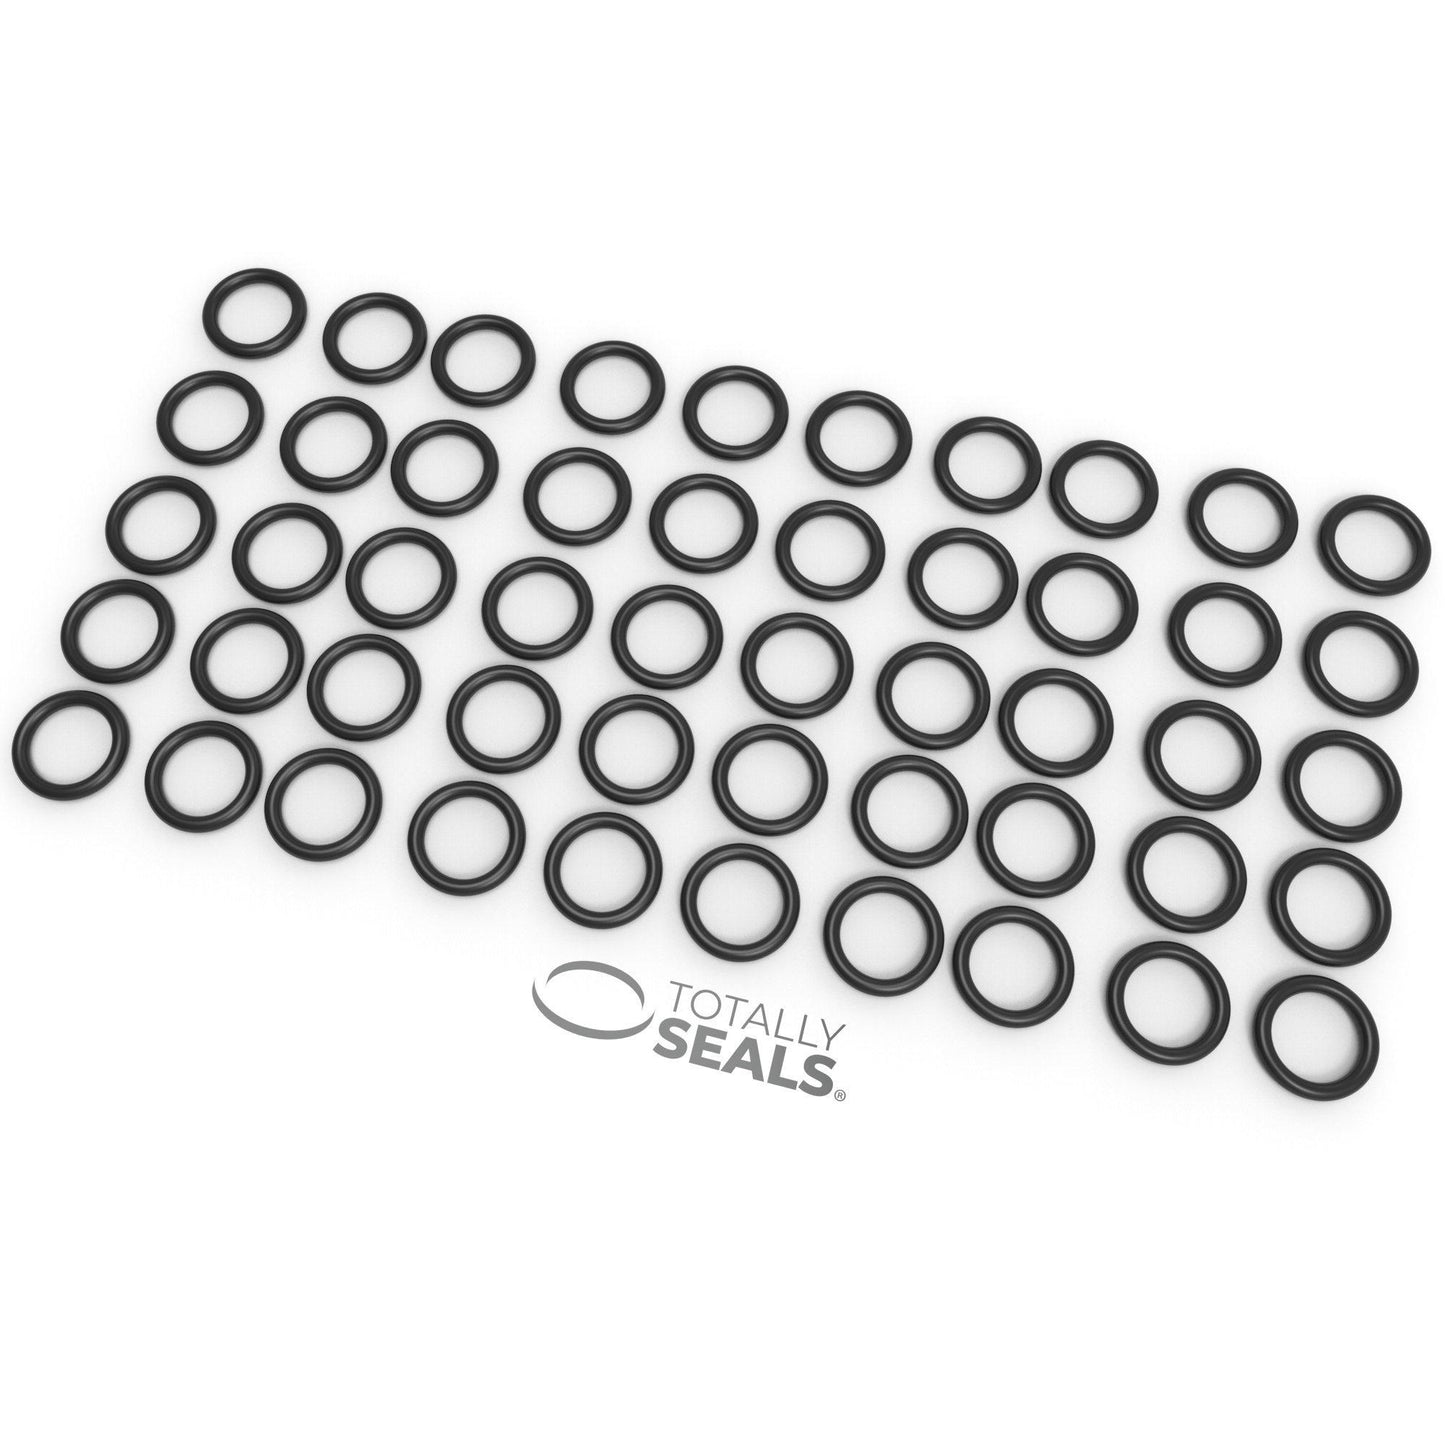 25mm x 1.5mm (28mm OD) Nitrile O-Rings - Totally Seals®